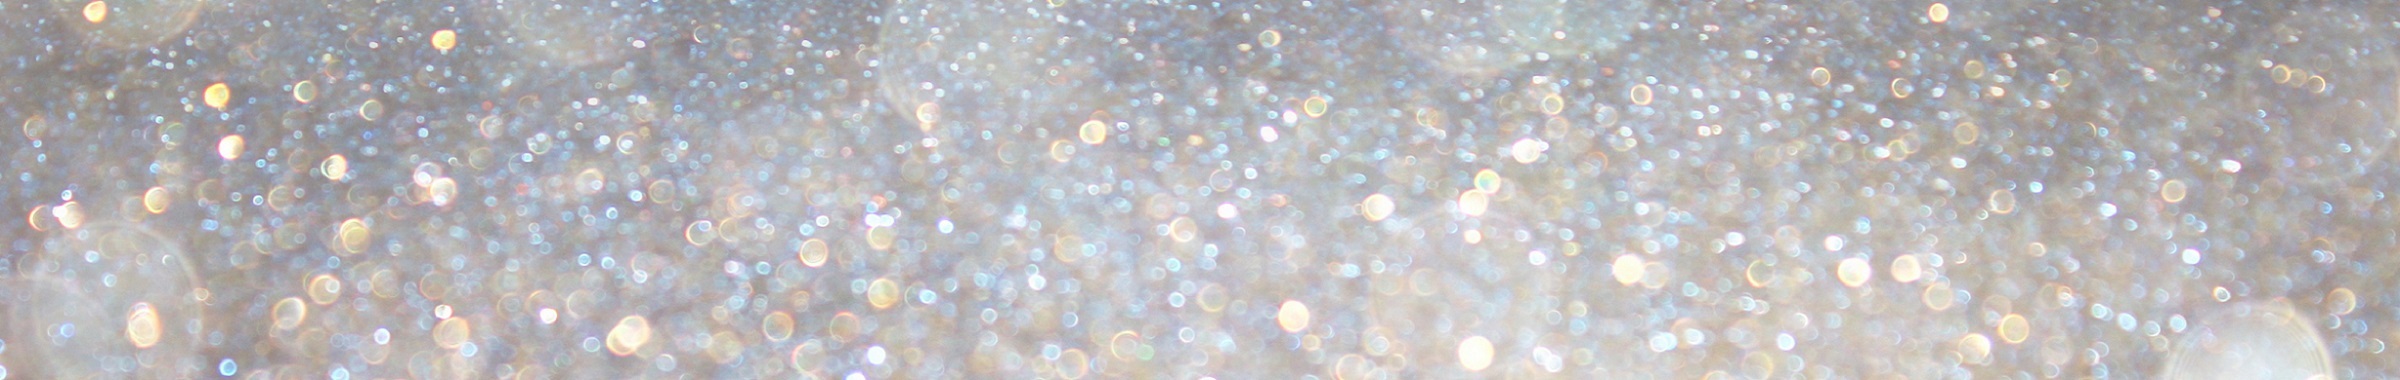 Silver and gold sparkle banner image